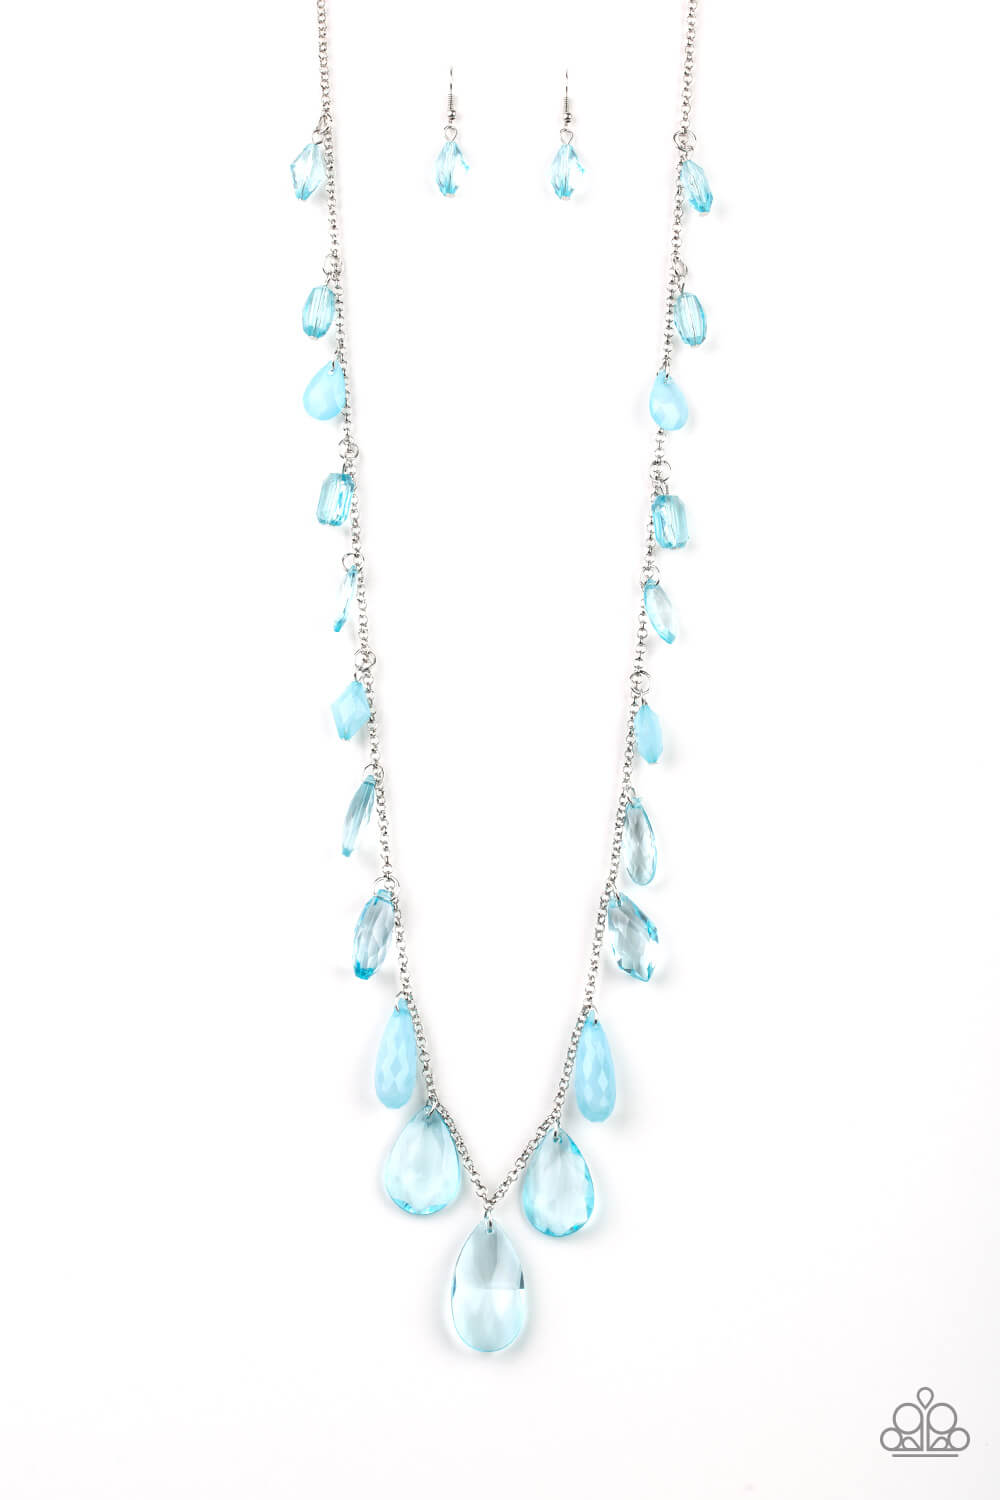 GLOW And Steady Wins The Race - Blue Necklace Set - Princess Glam Shop